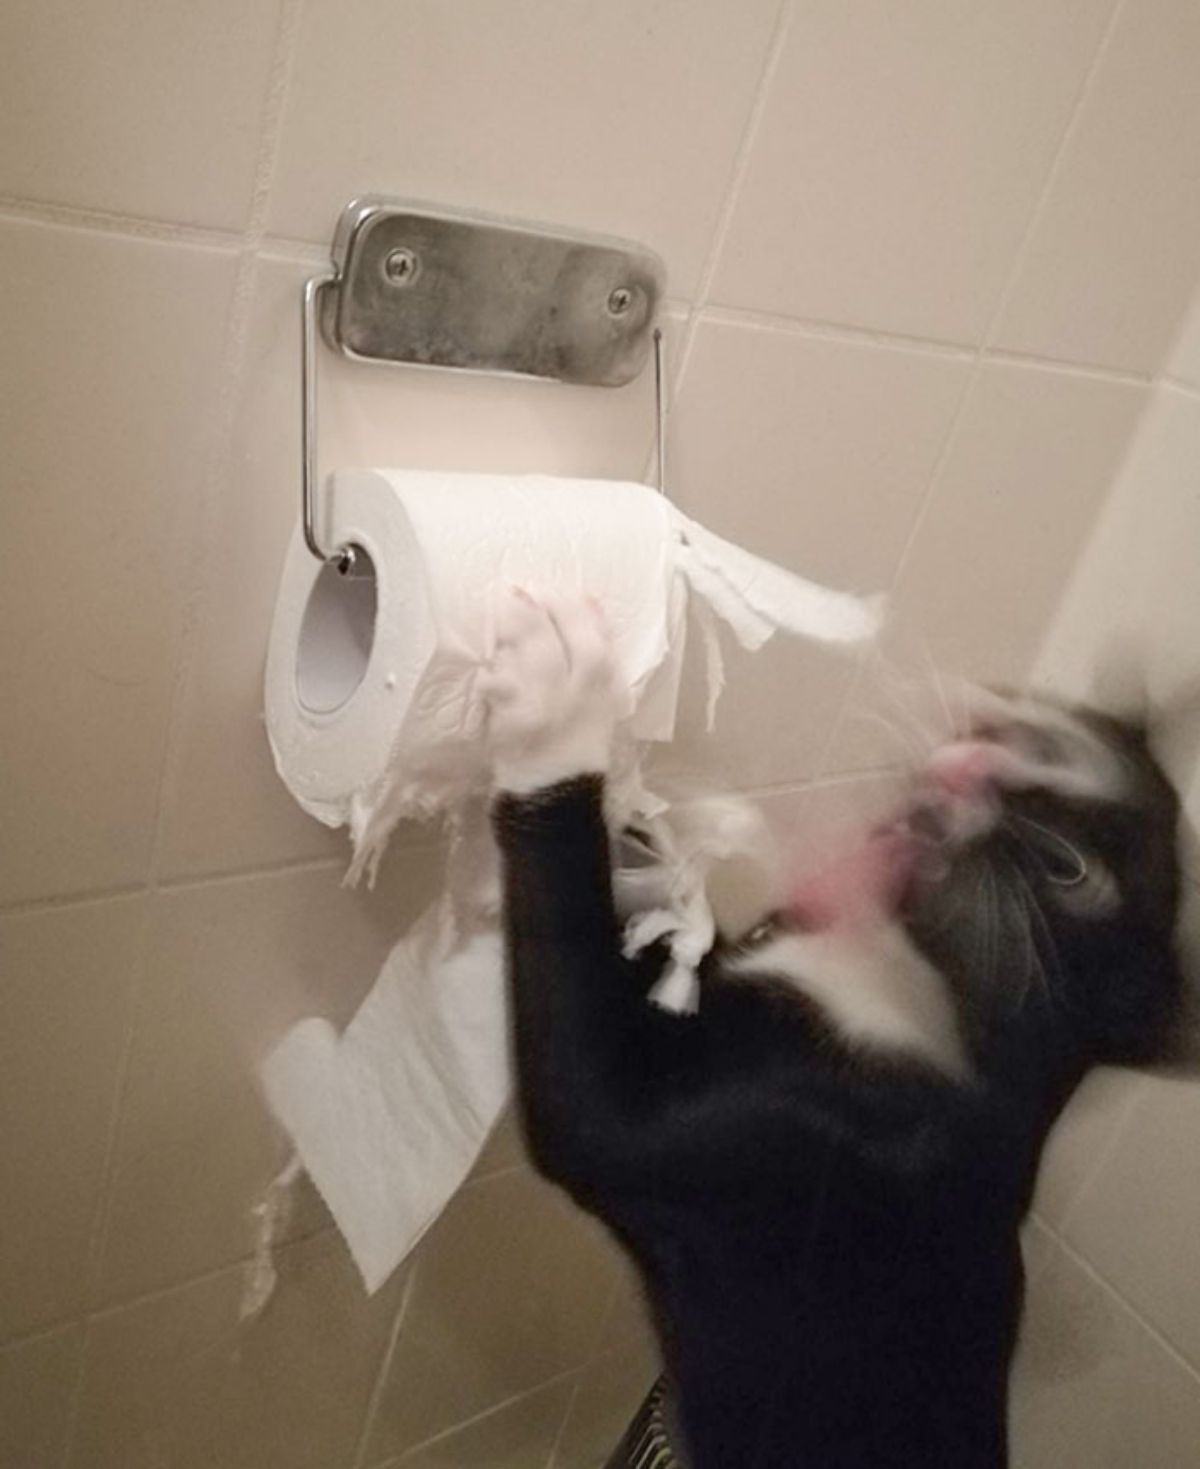 blurry image of a black and white cat ripping up a roilet paper roll in a bathroom